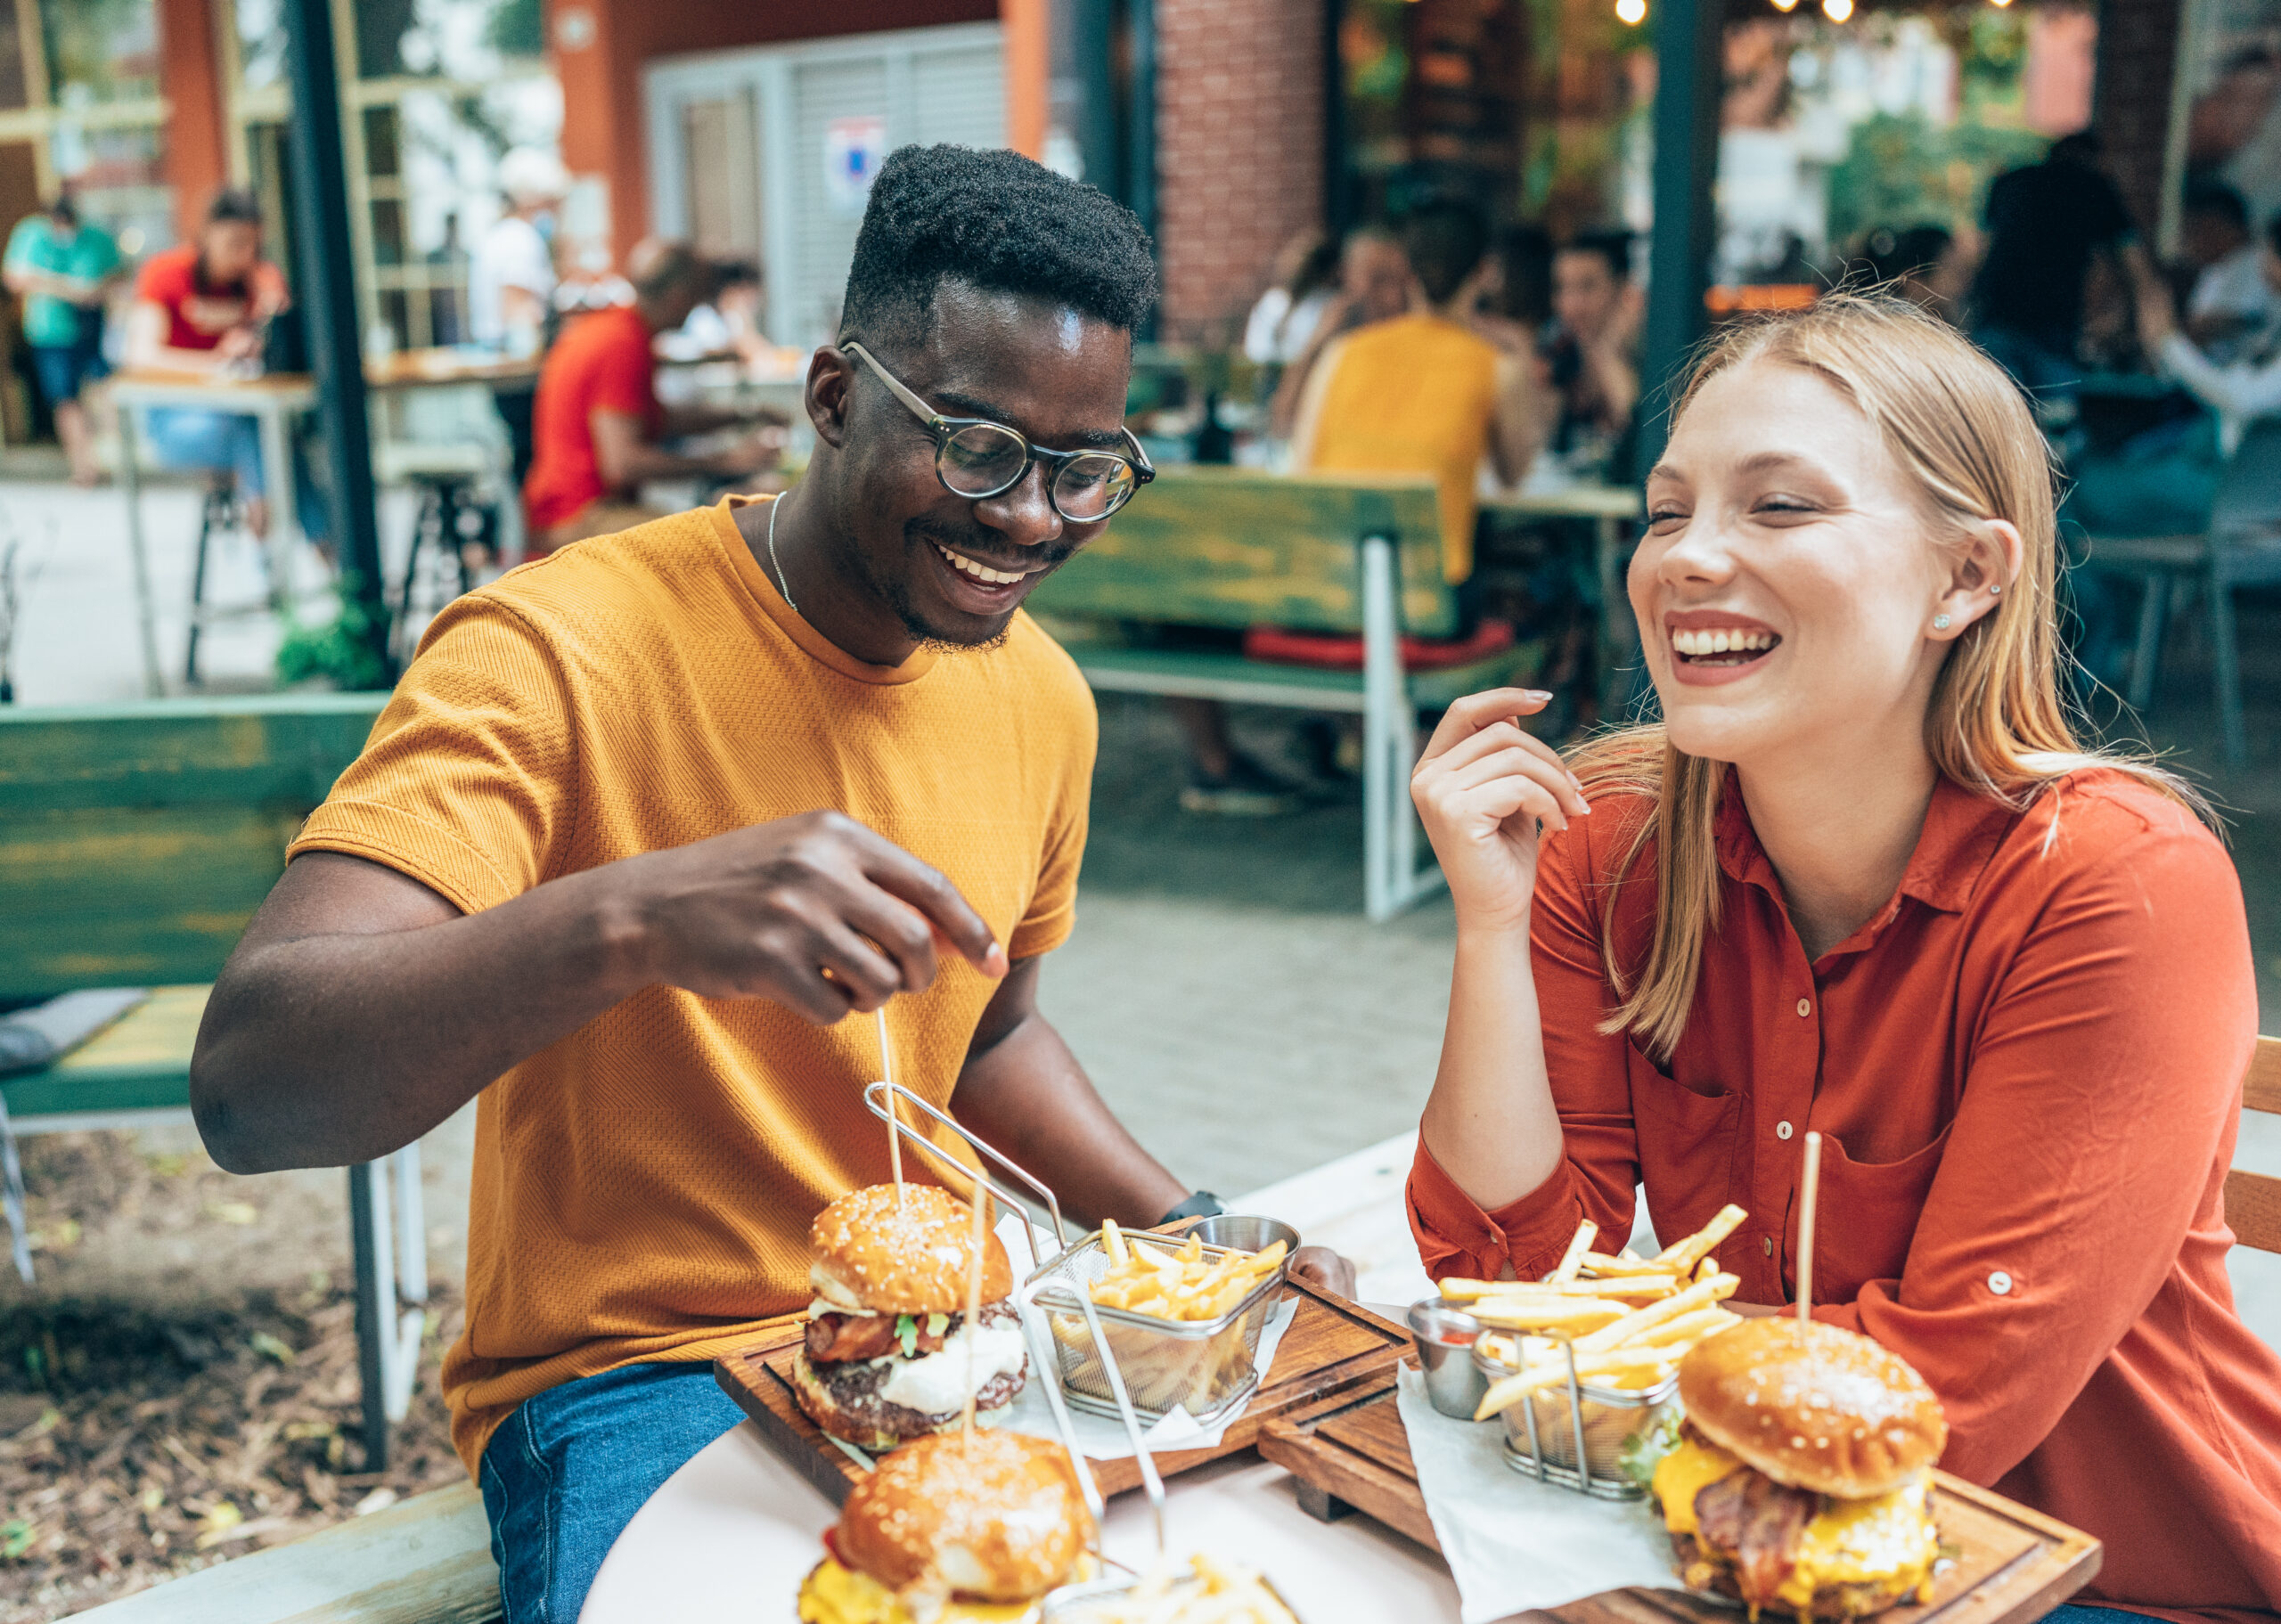 A young man and woman enjoying a meal of burgers and fries at an outdoor café, representing common dietary choices that may impact cholesterol levels.